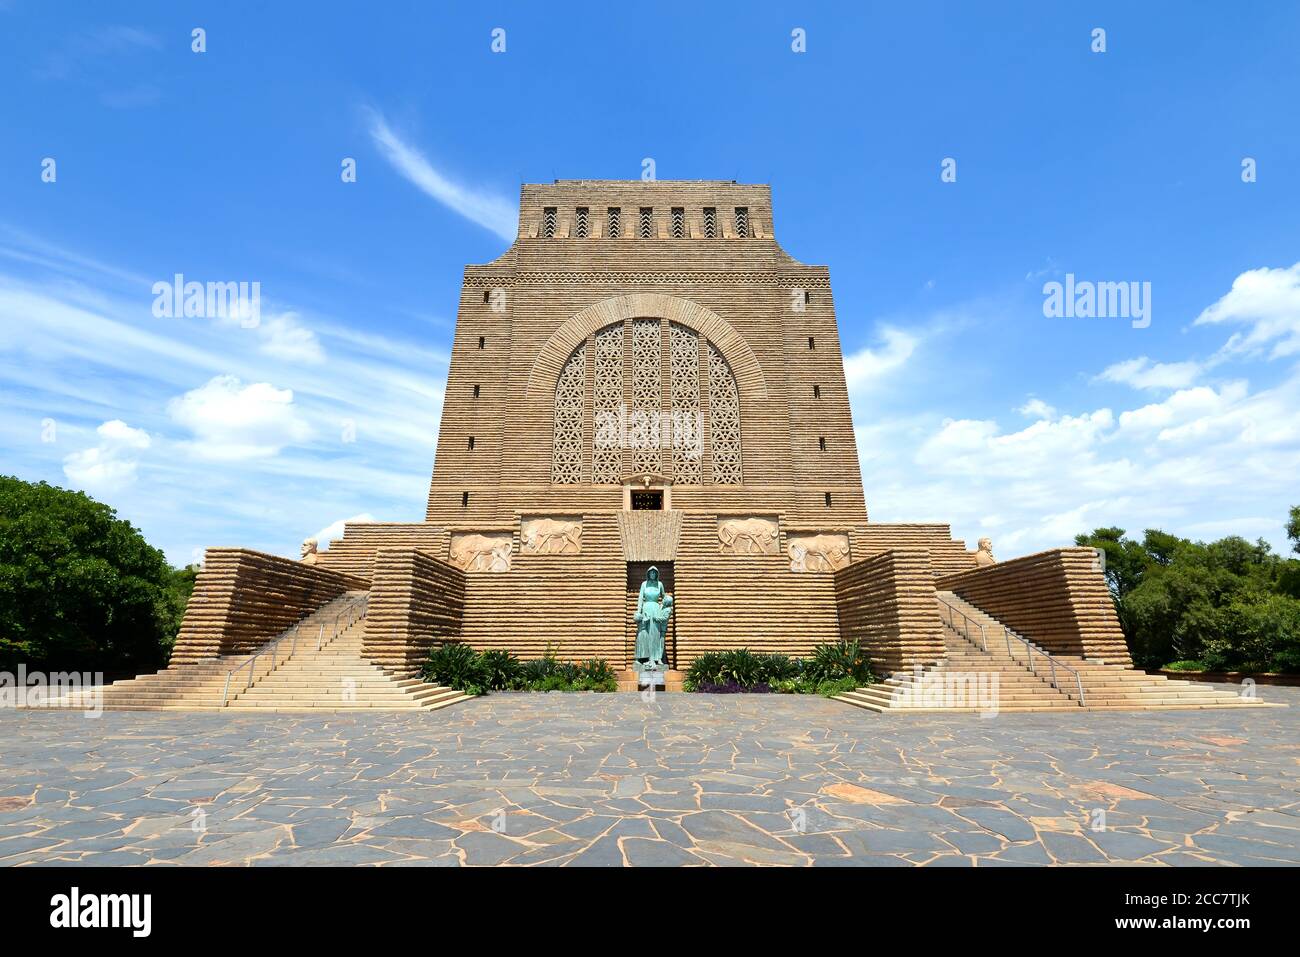 Voortrekker Monument built near Pretoria in South Africa. Structure designed by Gerard Moerdijk. In honor of Voortrekkers who left the Cape Colony. Stock Photo